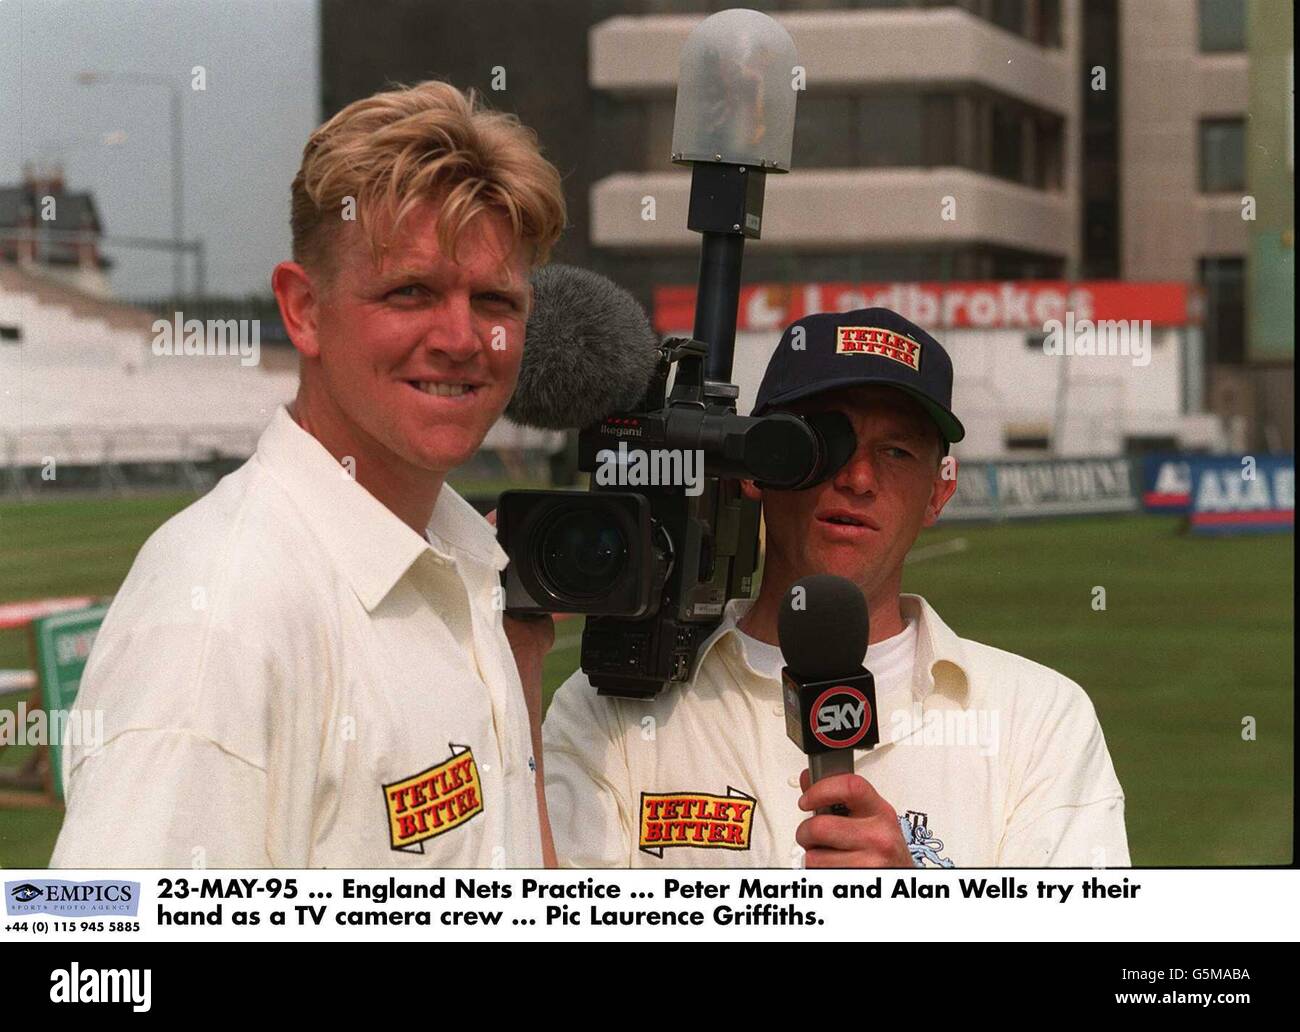 23-MAY-95, England Nets Practice, Peter Martin and Alan Wells try their hand as a TV camera crew Stock Photo